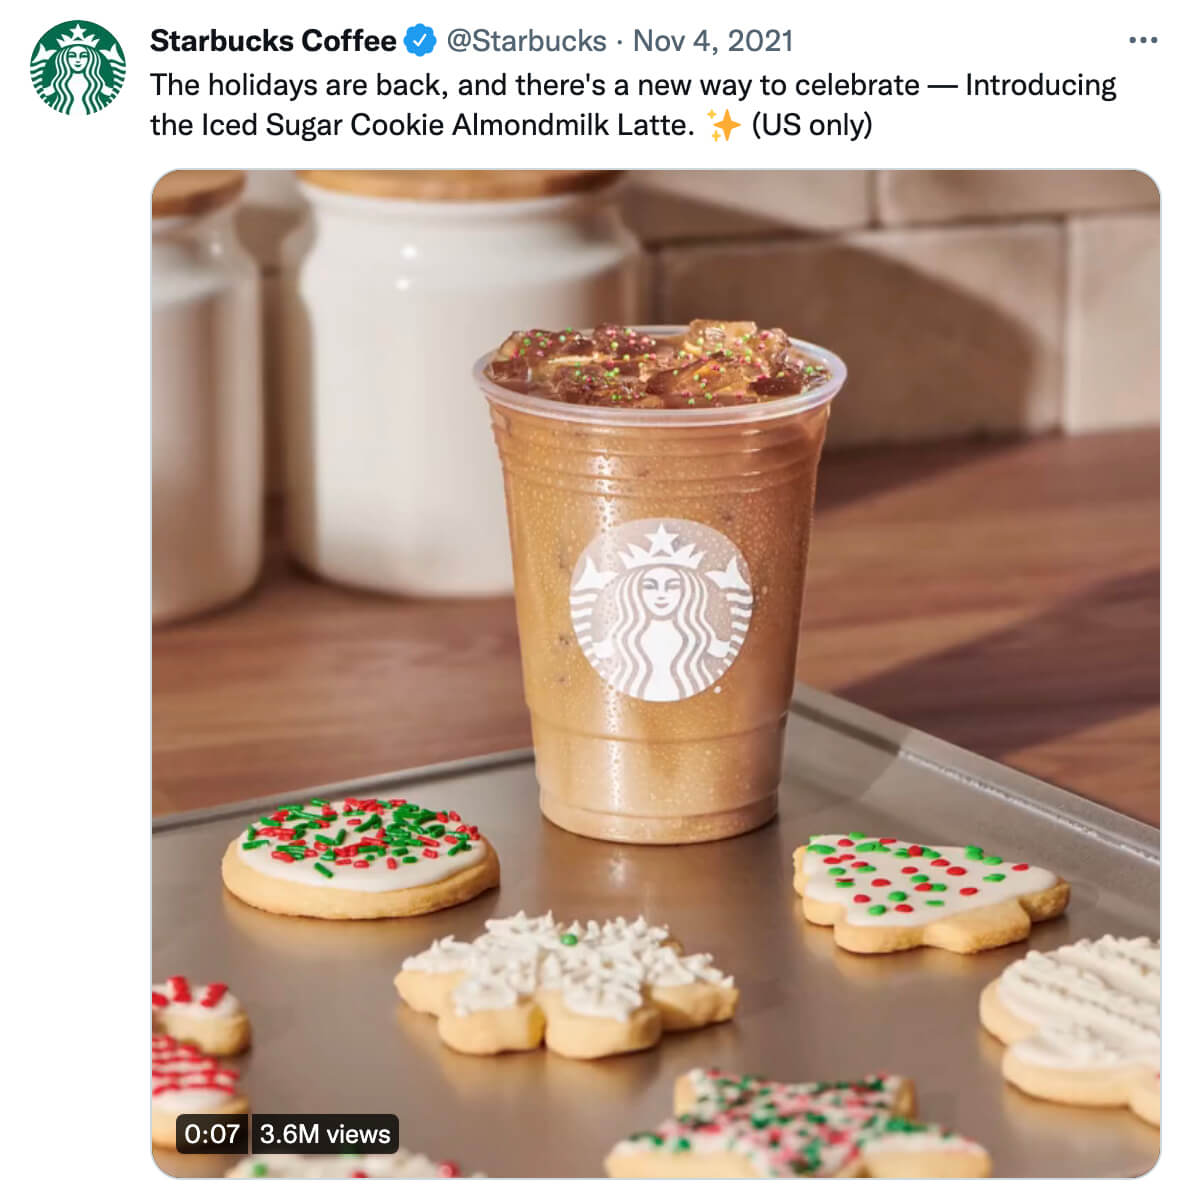 social-media-marketing-guide-holiday-campaigns-2022-elements-organic-content-starbucks-tweet-example-7